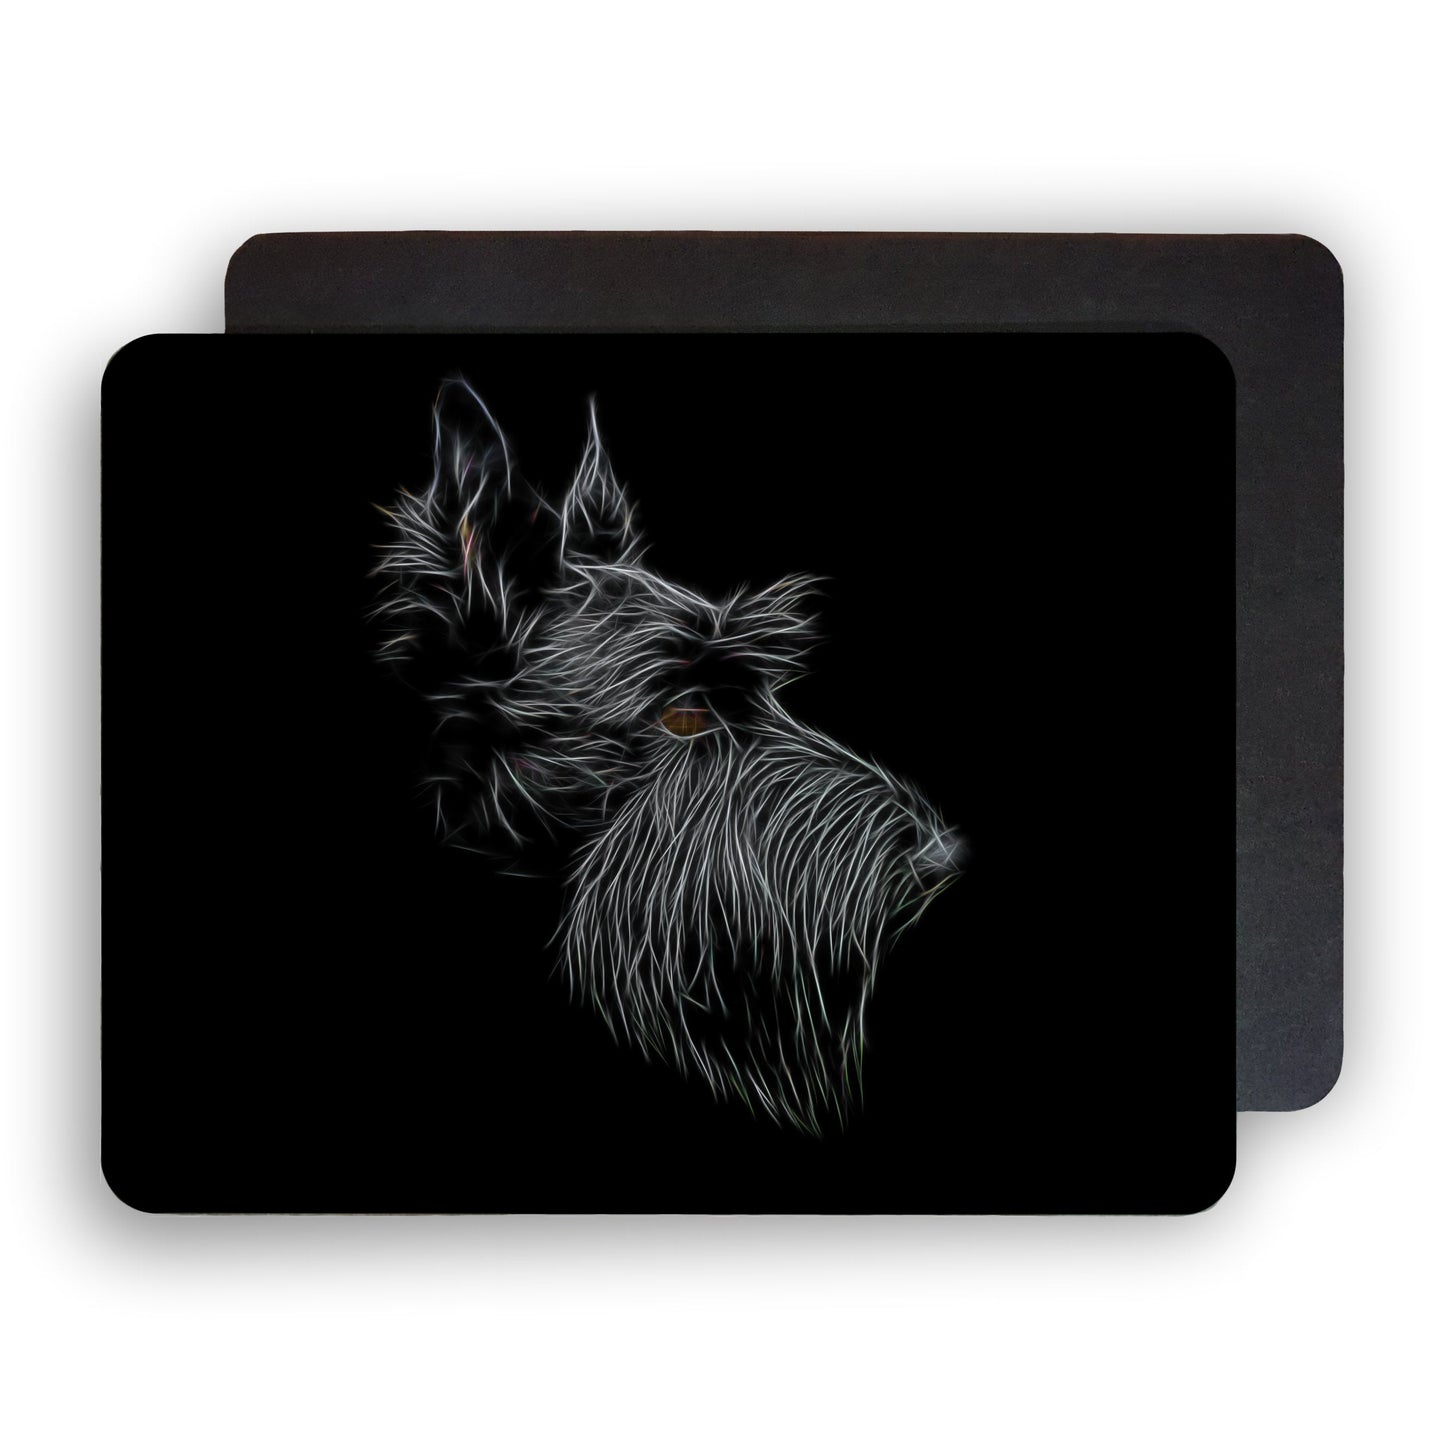 Scottish Terrier Placemats with Stunning Fractal Art Design. Set of Two.